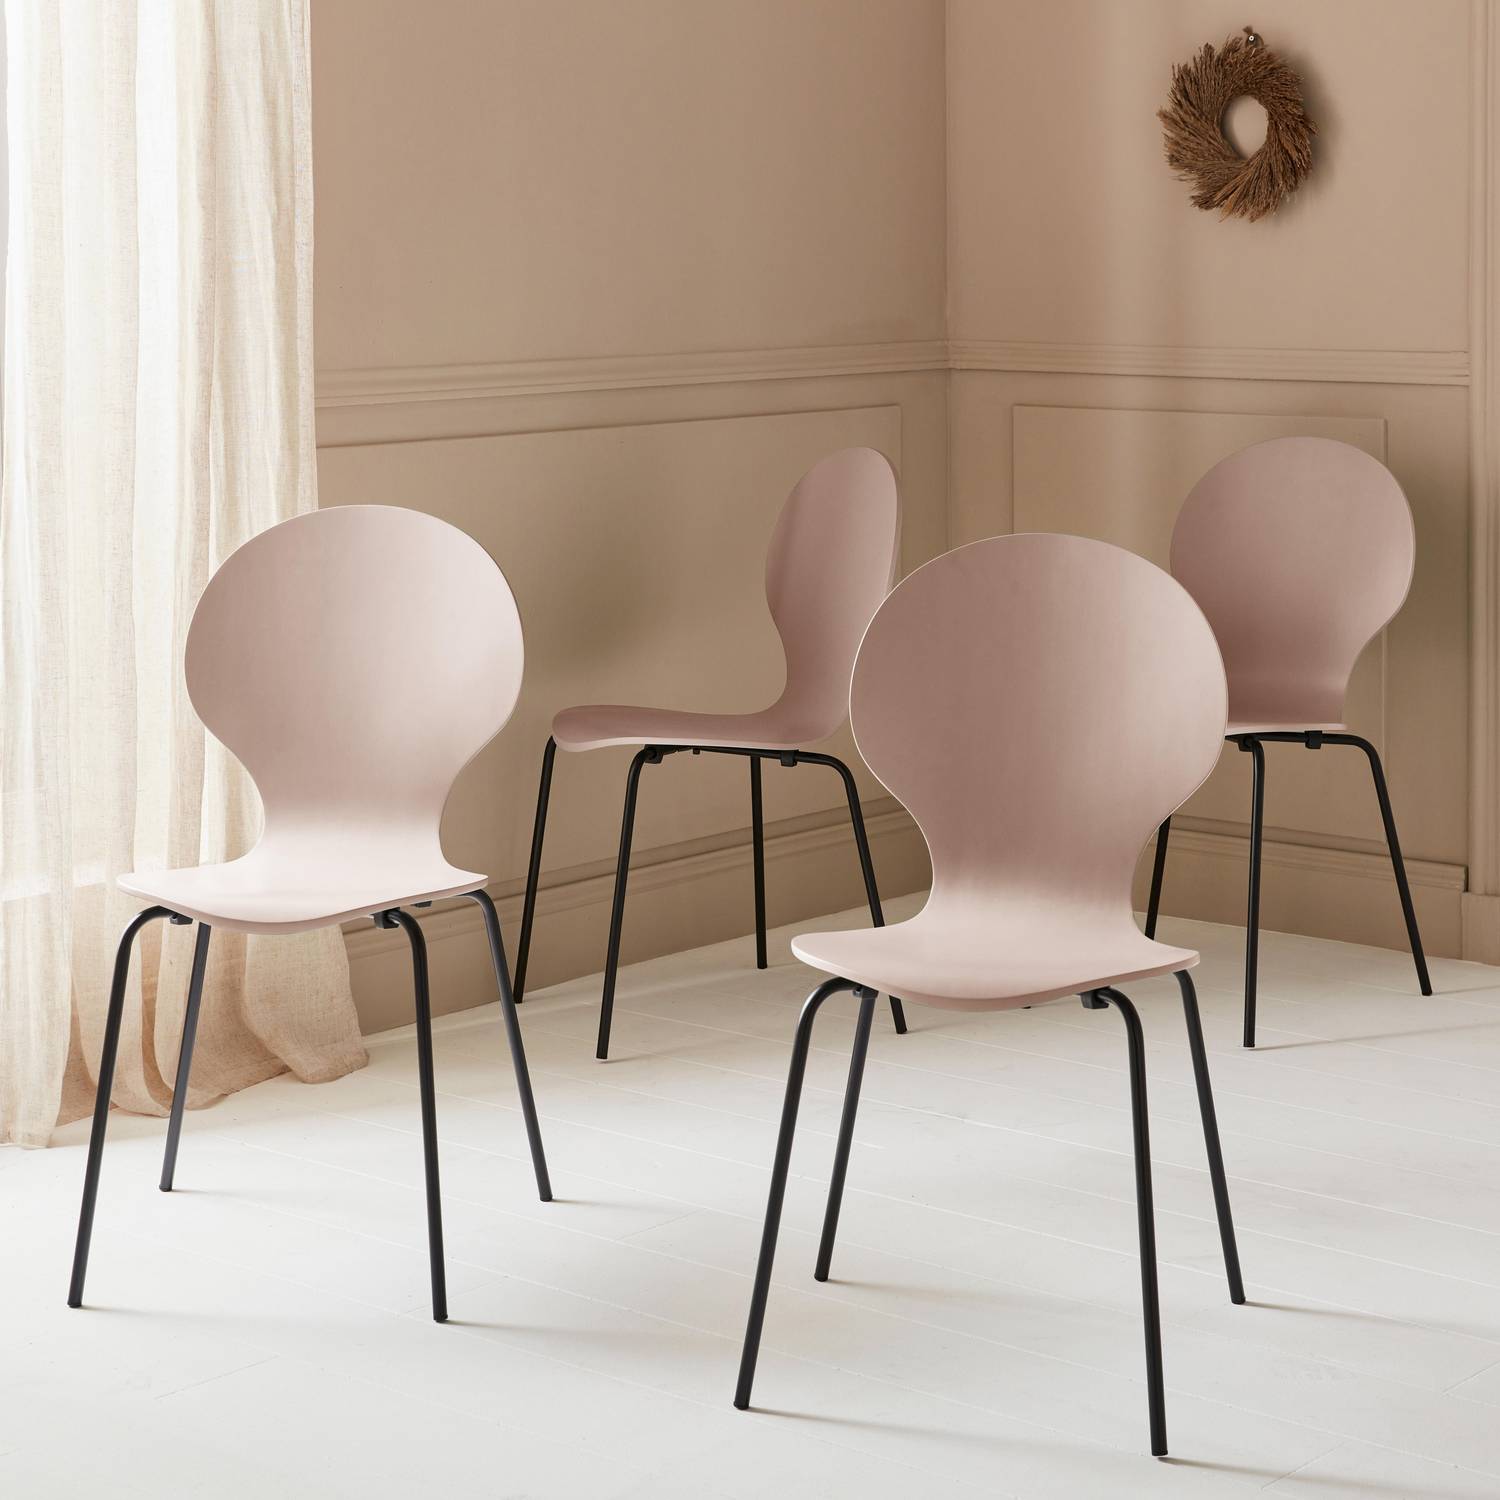 Set of 4 stackable Retro Chairs, Wood and Plywood, L43xW48xH87cm, pink Photo2